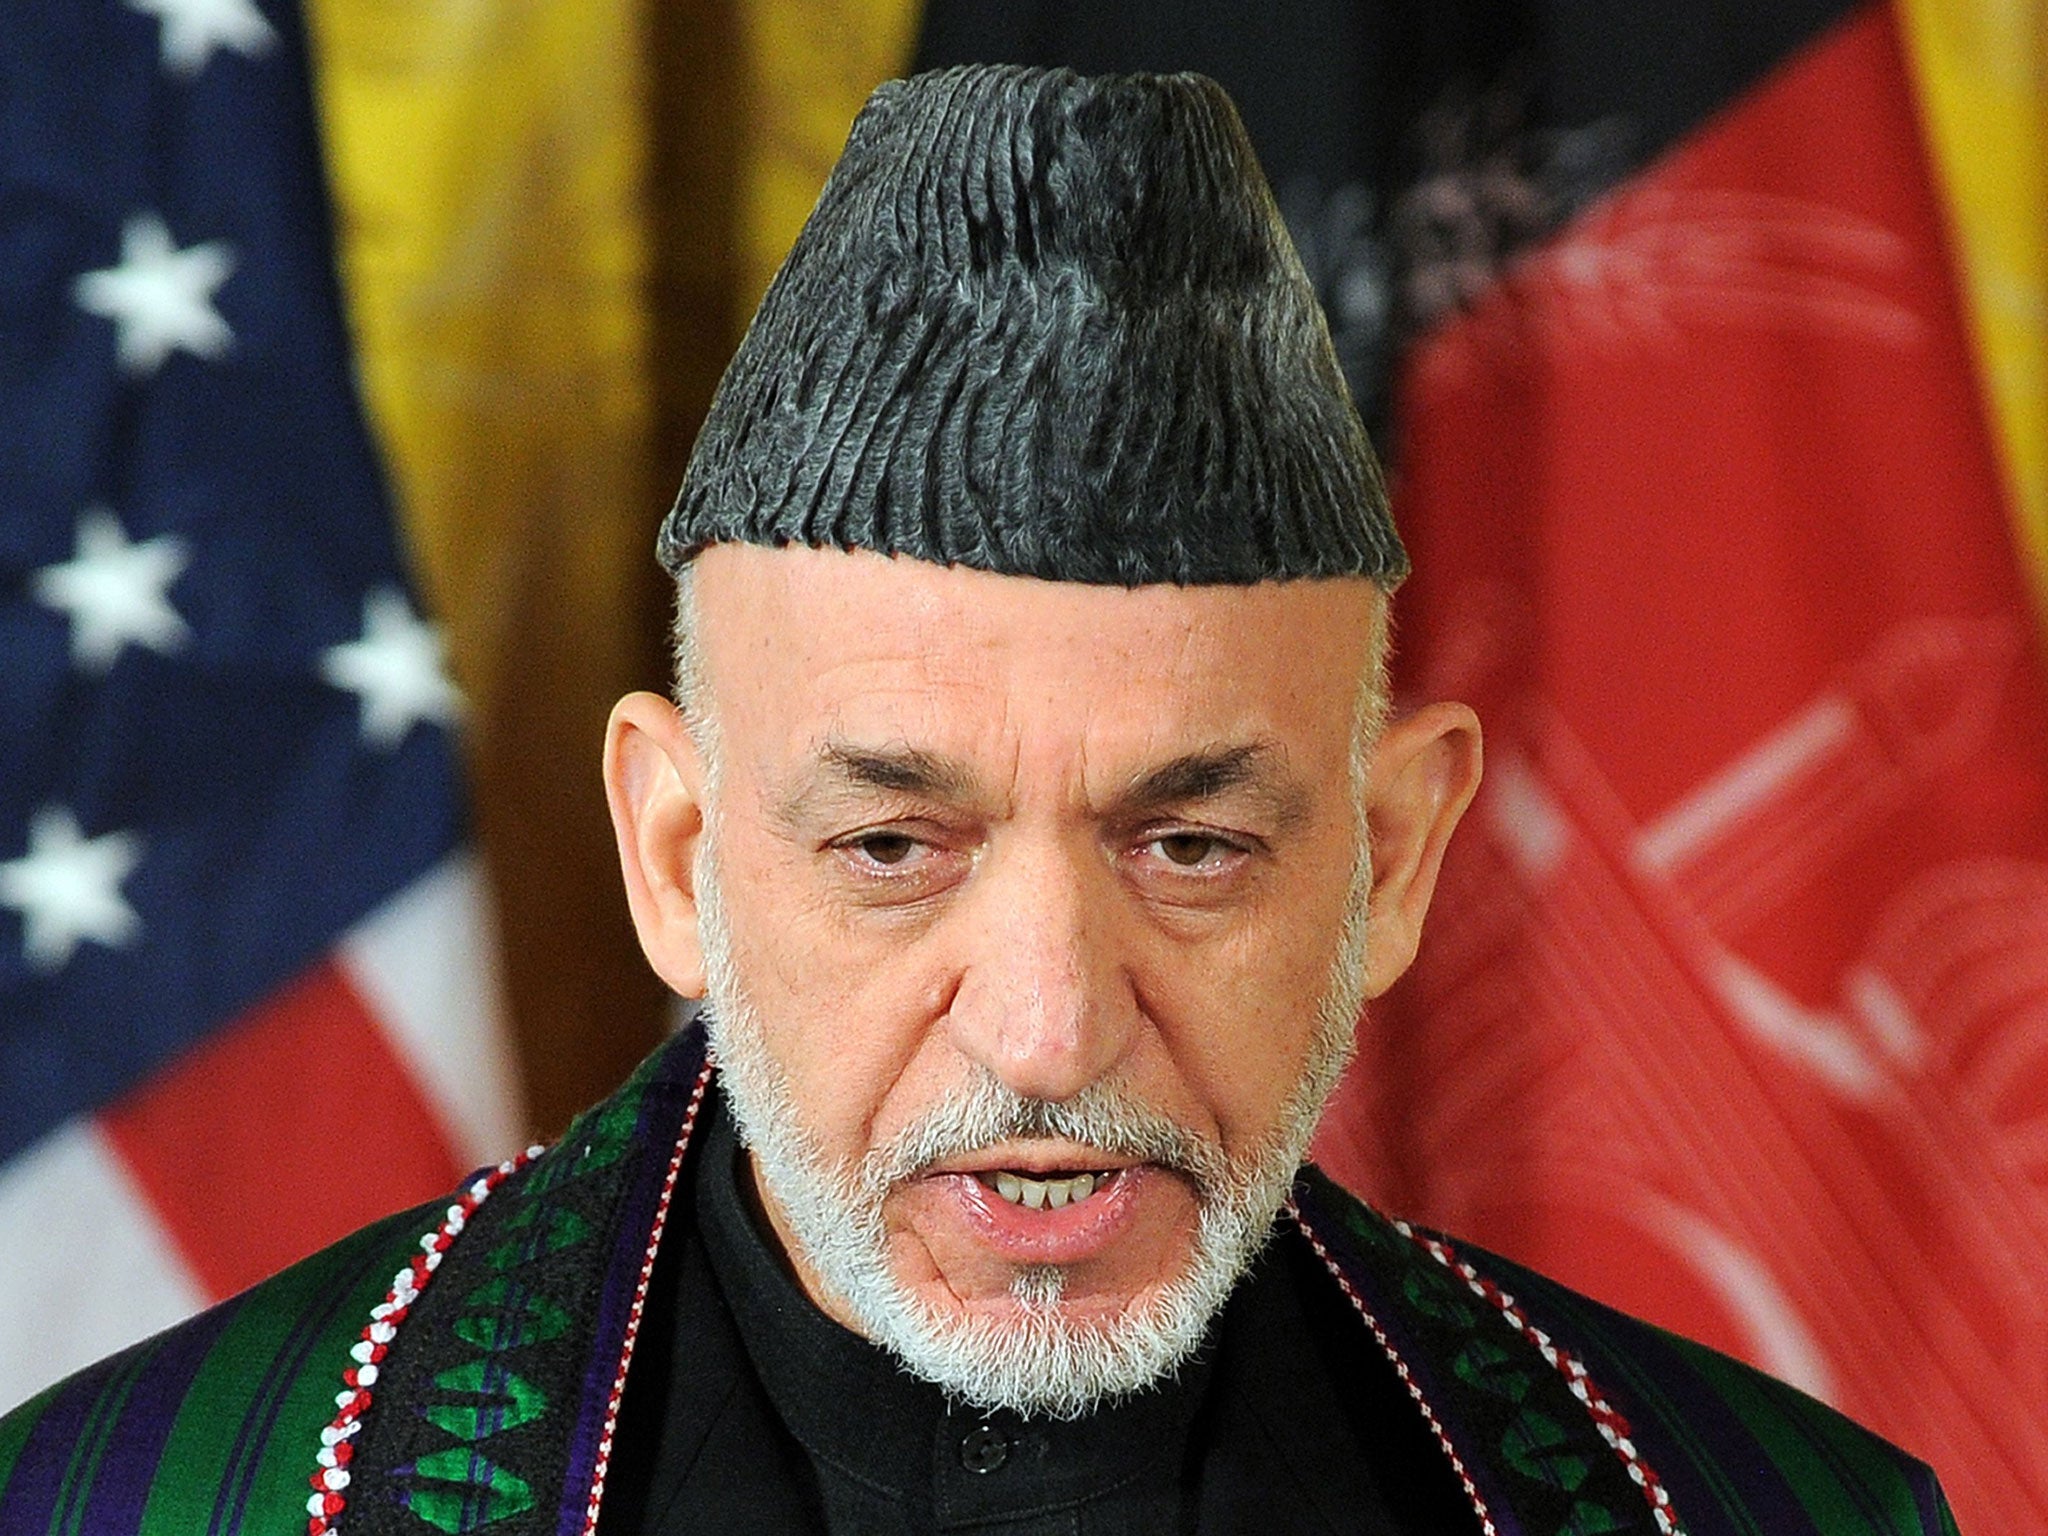 Afghan President Hamid Karzai has admitted that his national security team has been receiving payments from the US government for the past 10 years